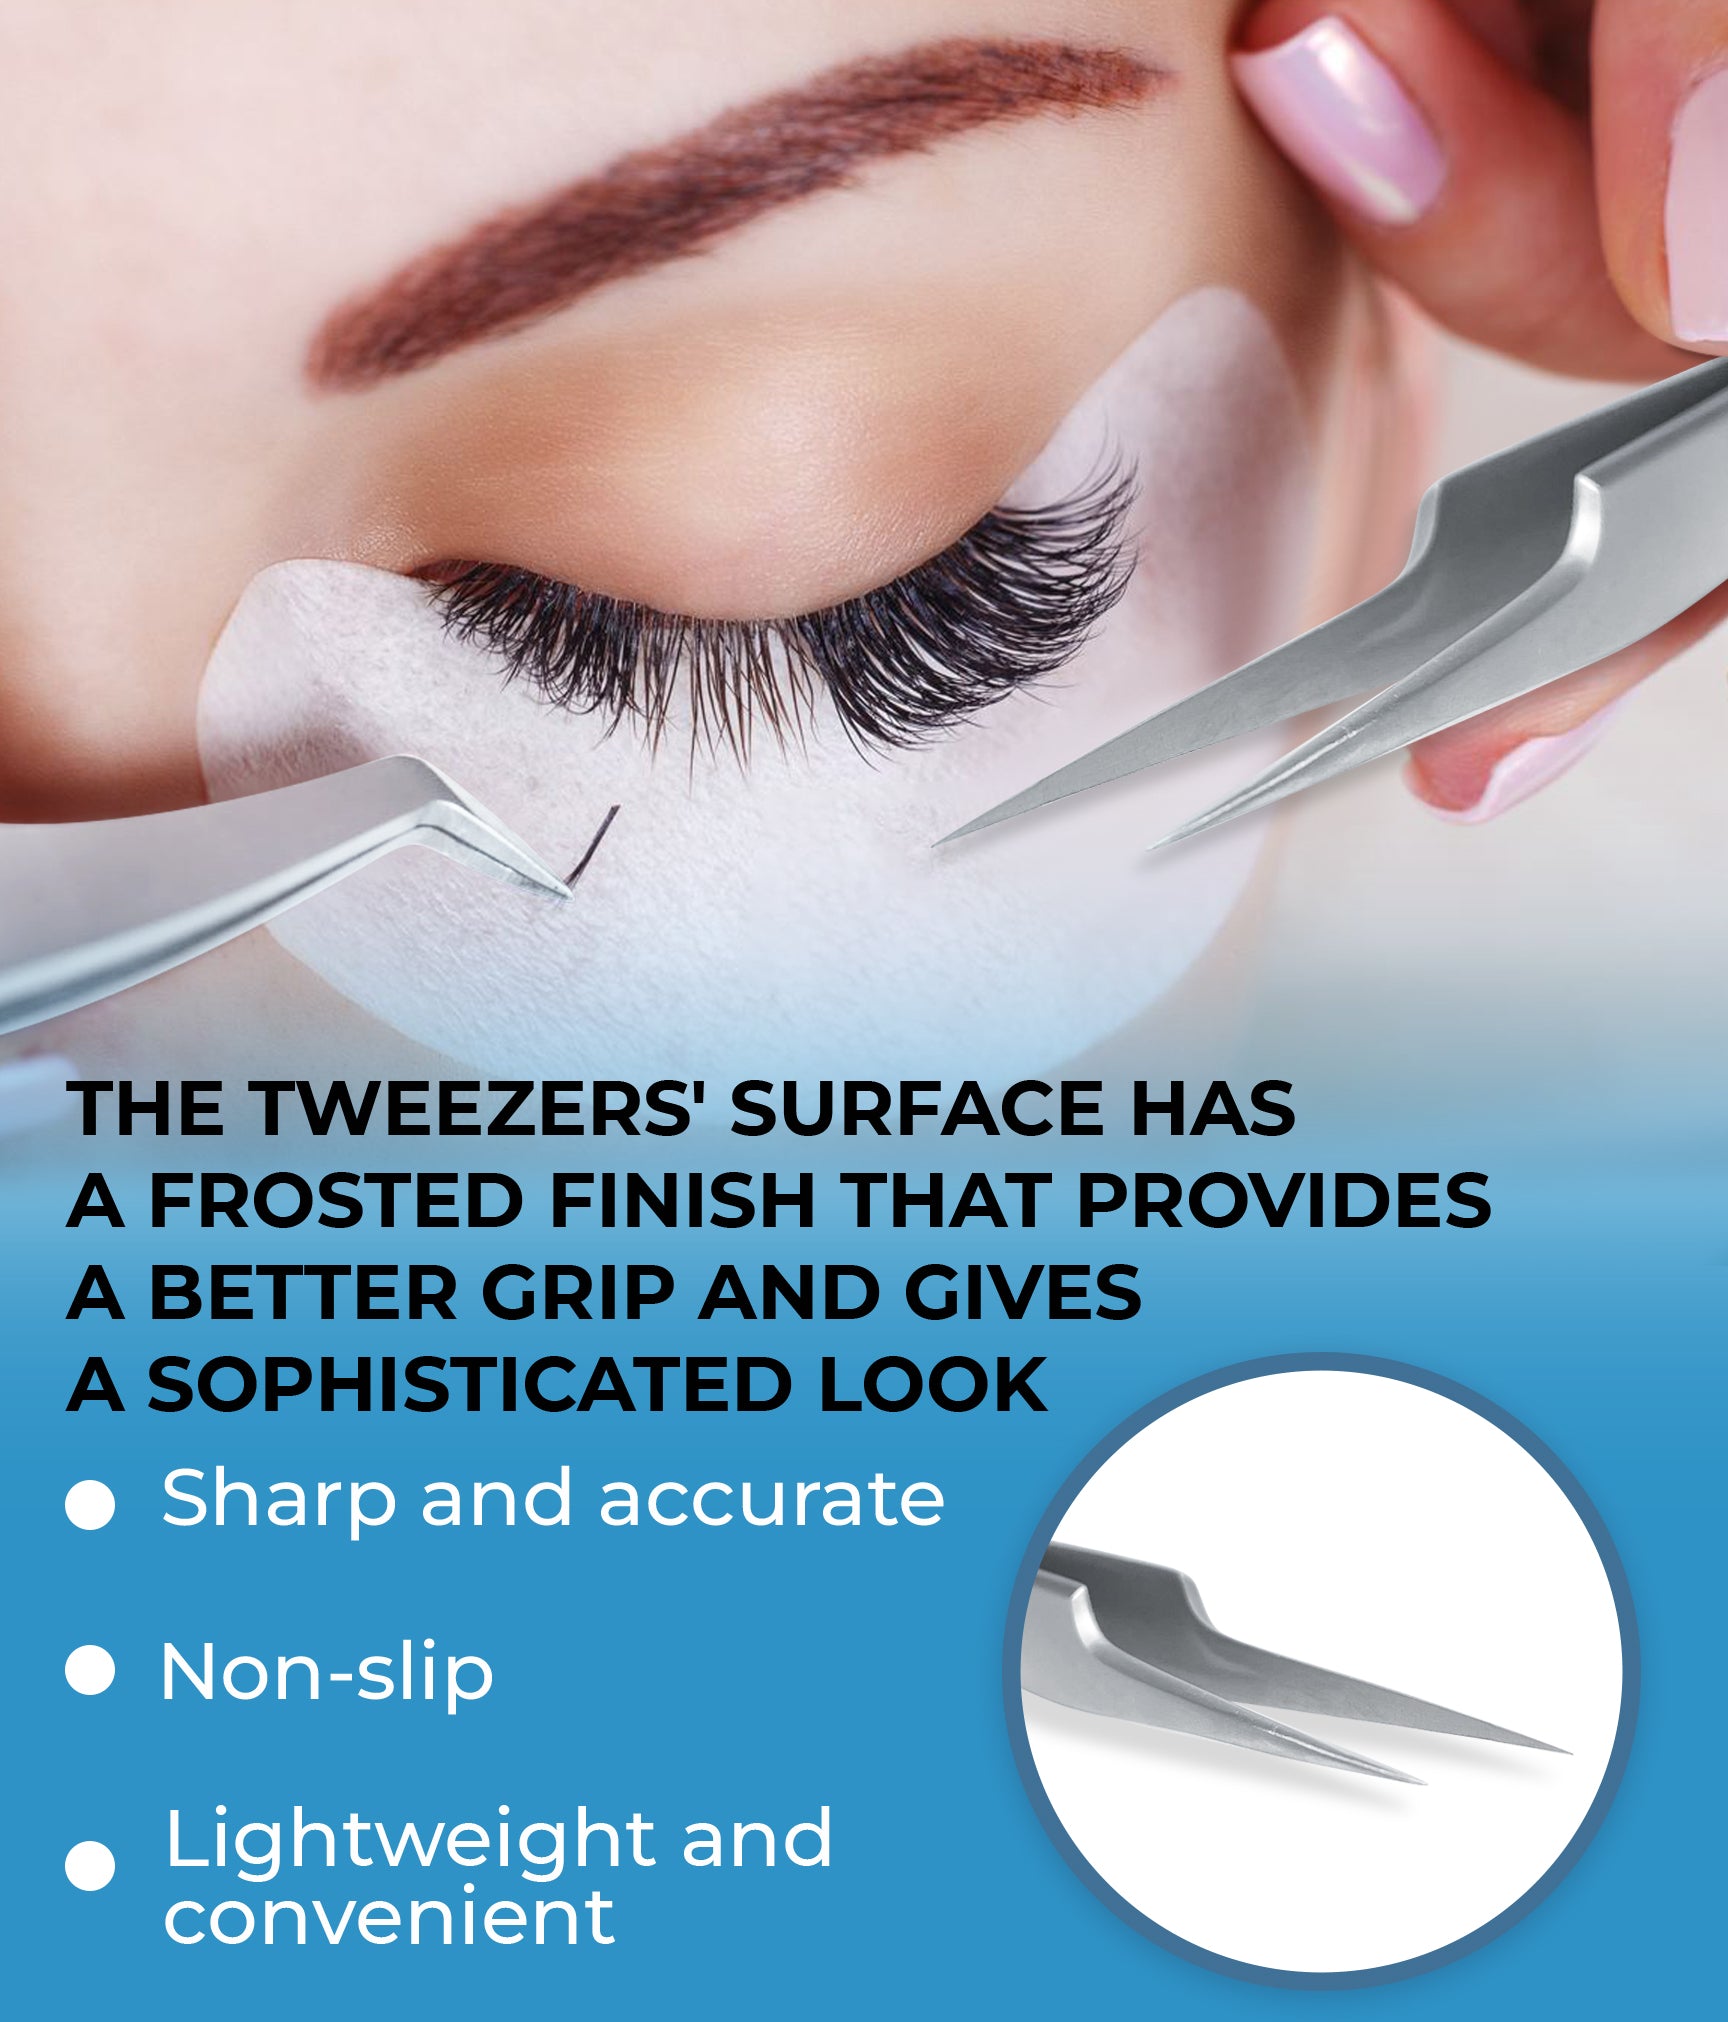 Stacy Lash STL-3 F-Shaped Isolation Tweezers for Lash Extensions